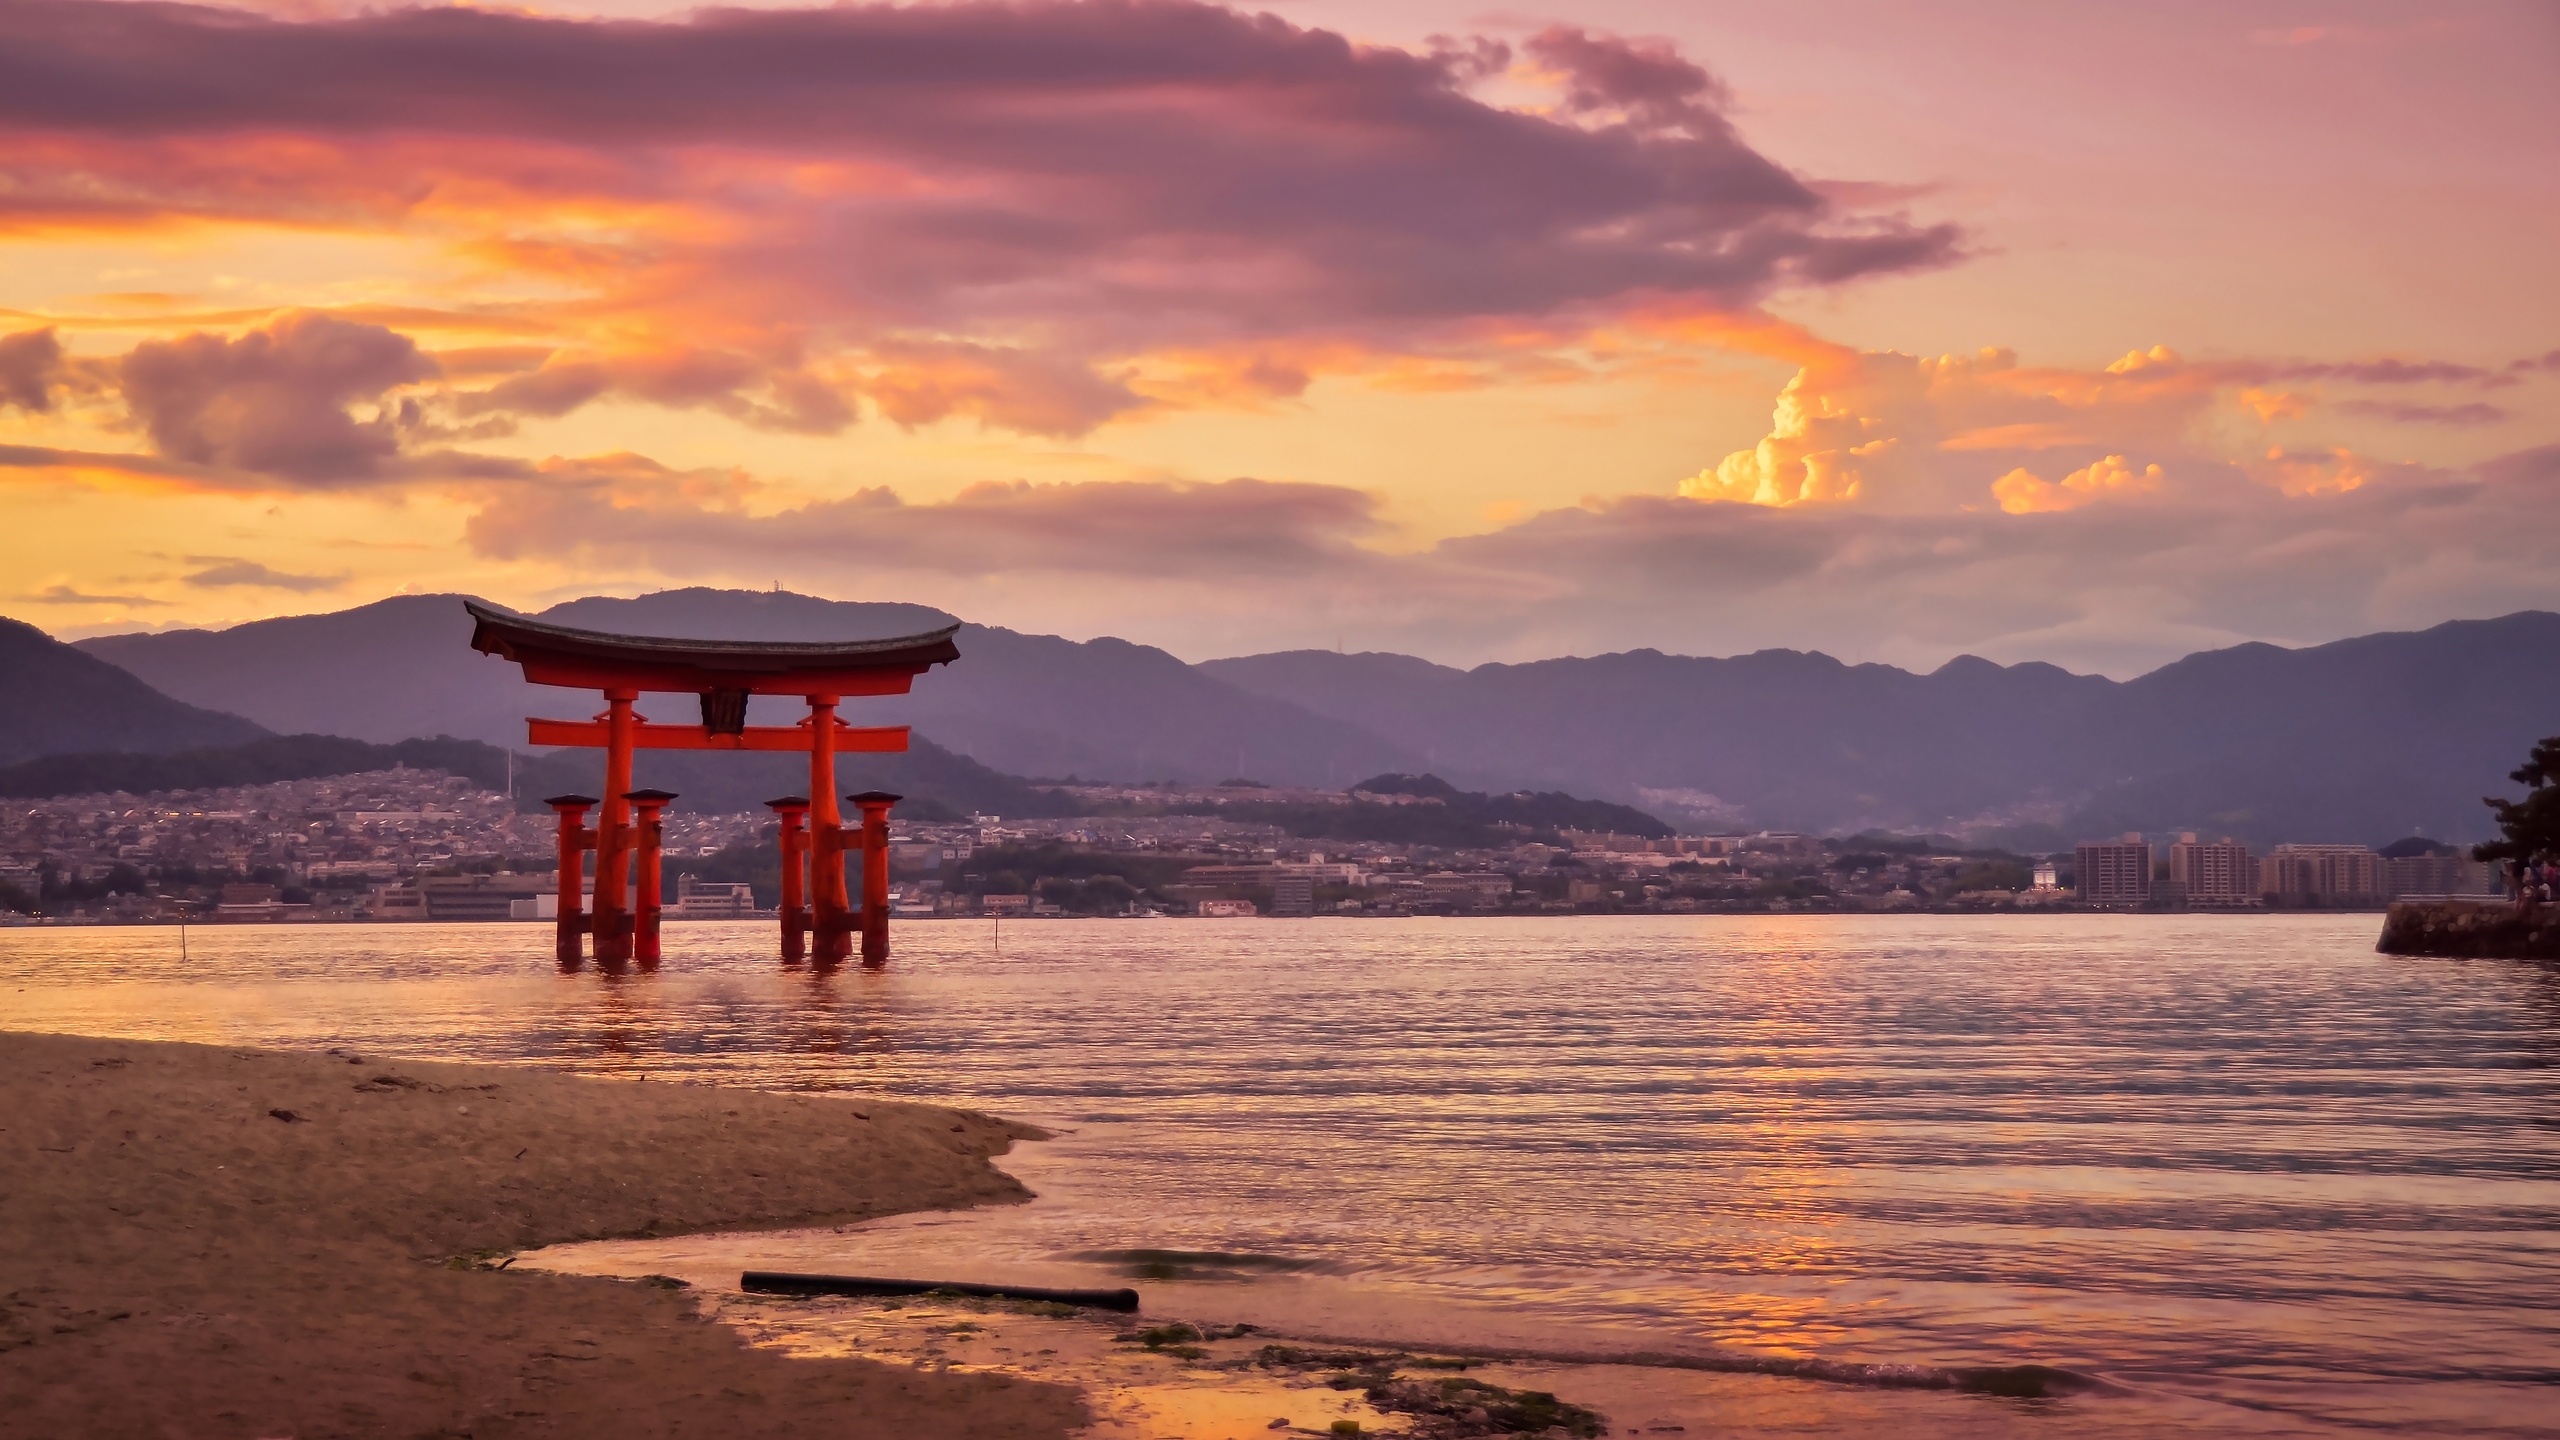 Experience attractive Japanese sights like this vermillion torii gate in Miyajima when you take a tailor-made holiday with Alfred&.